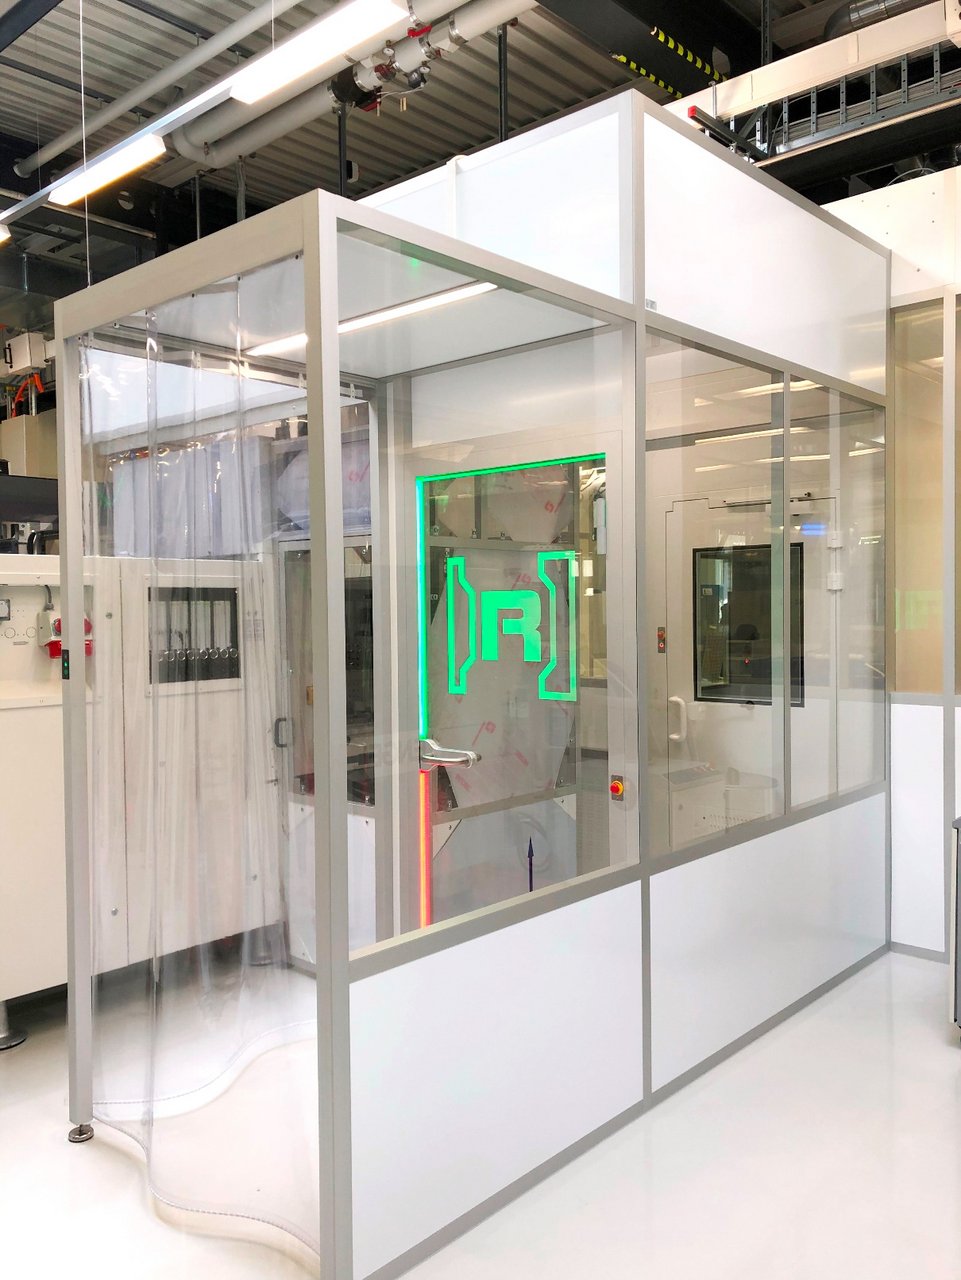 Cleanroom housing for injection moulding machines for the aseptic production of drug packaging, cleanroom class ISO 7